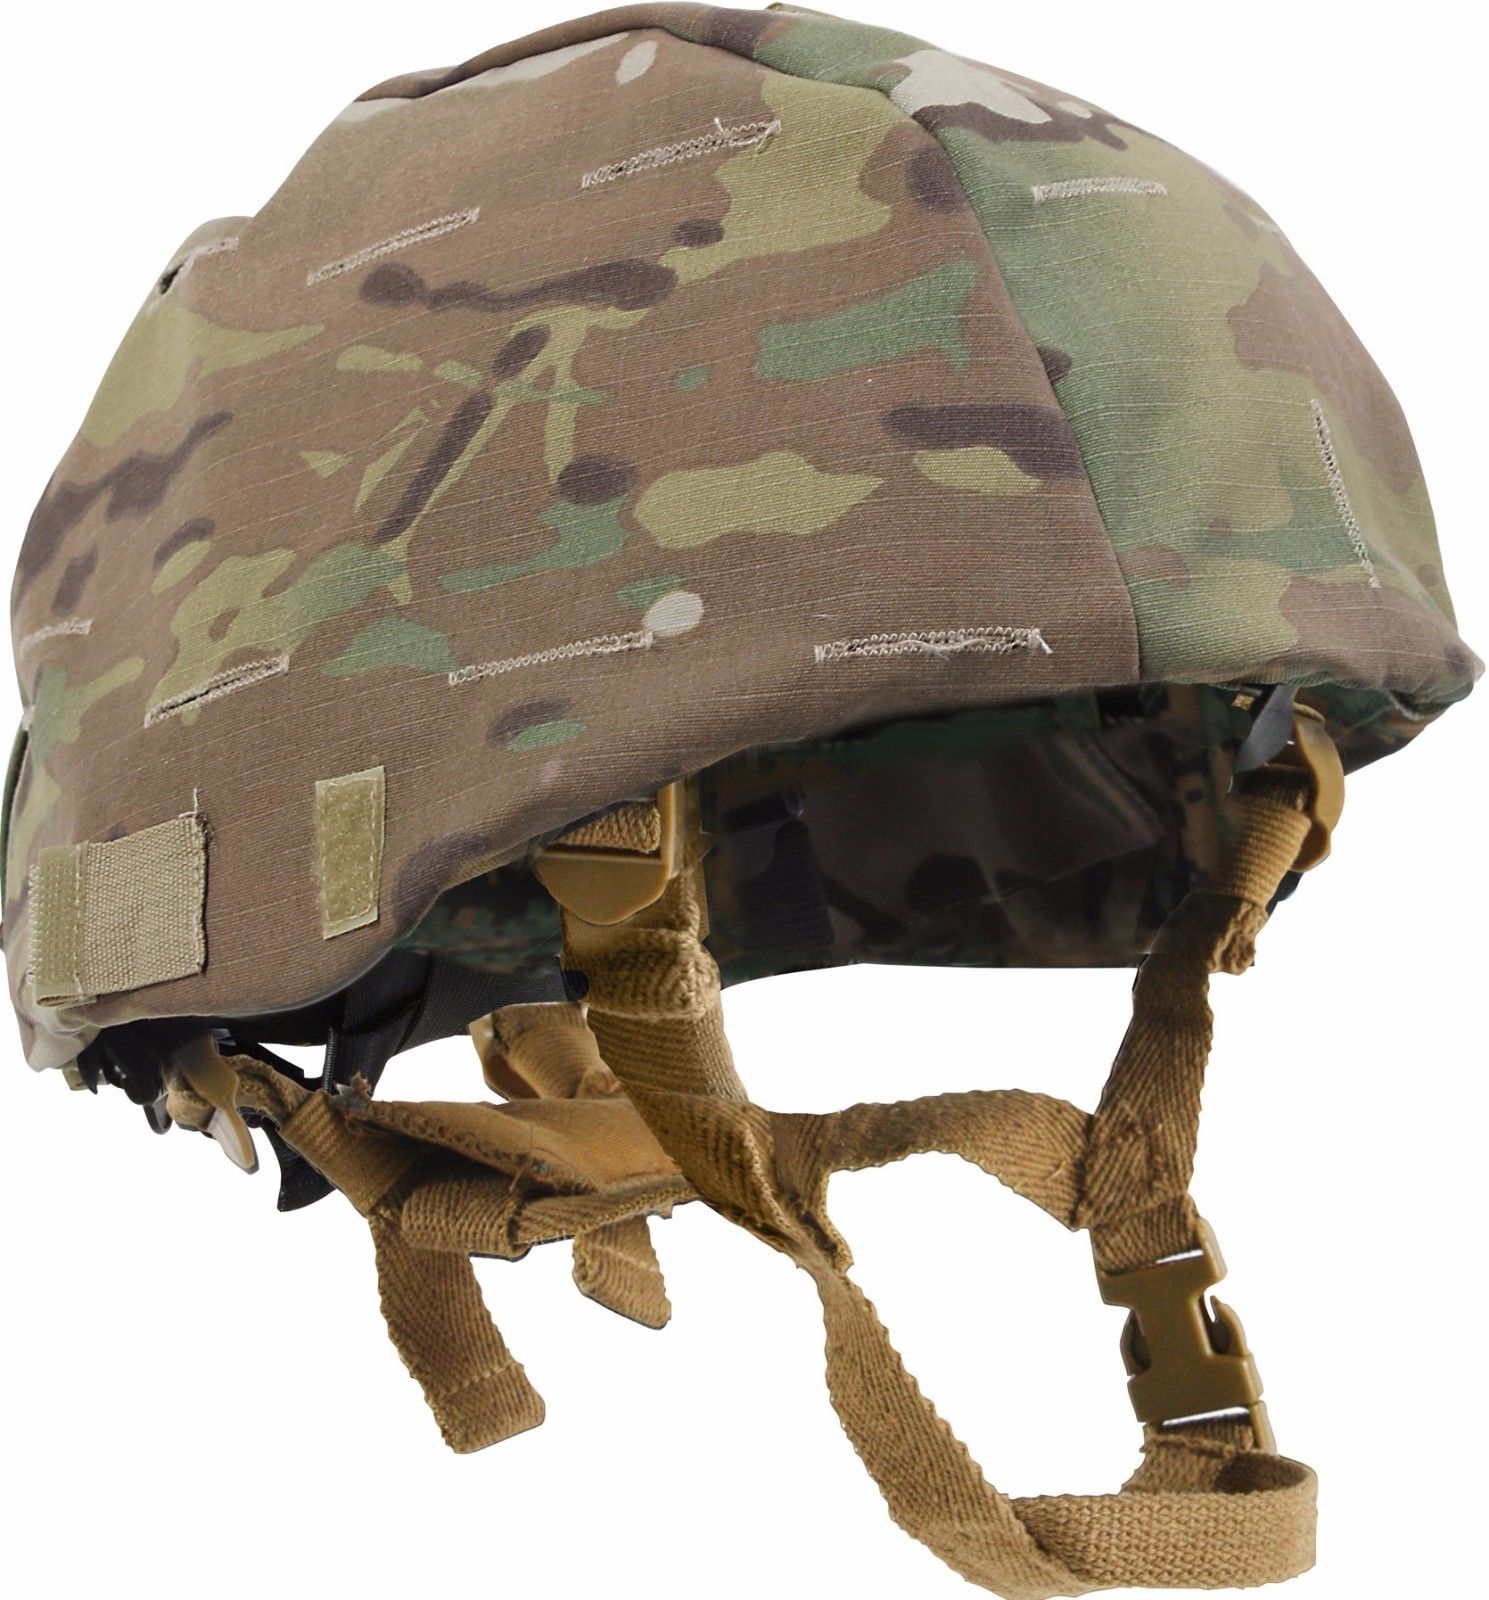 Multicam Camouflage Mich Tactical Military Helmet Cover Rothco 9629 ...